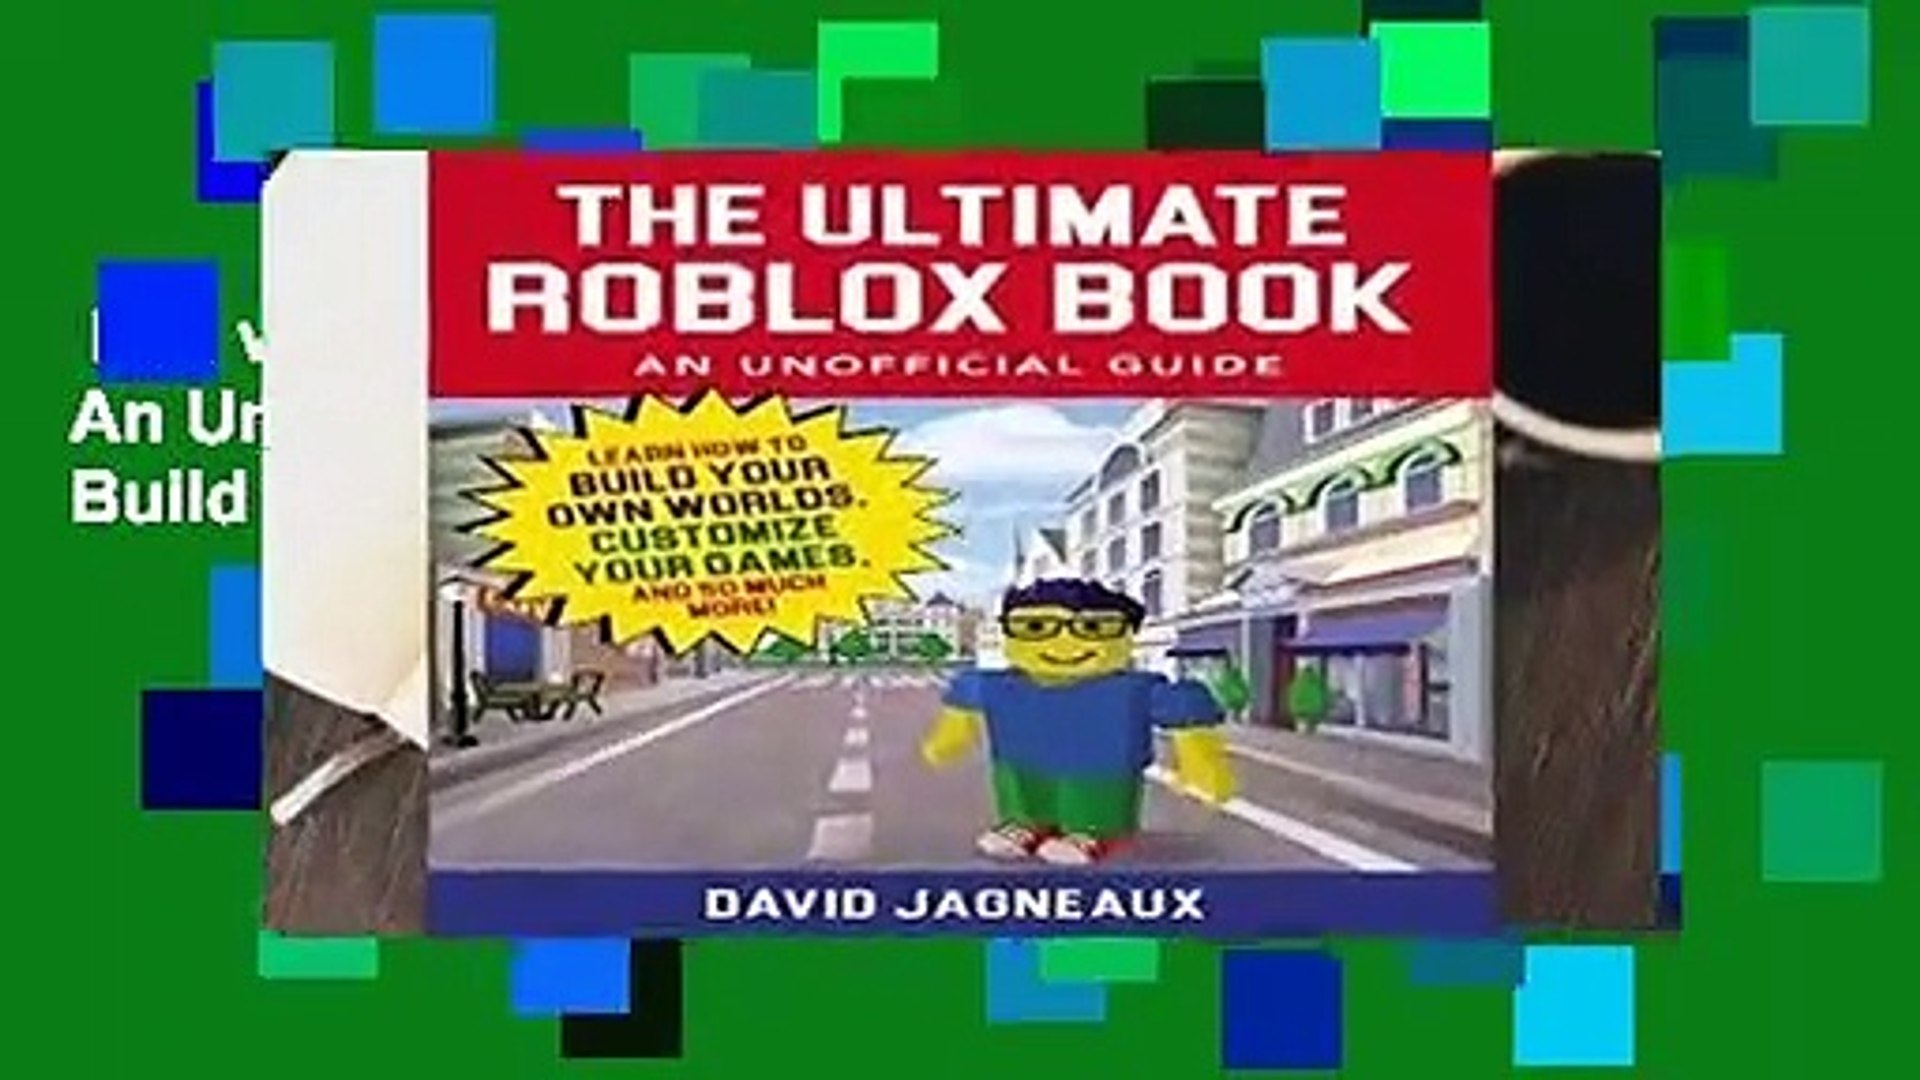 Full Version The Ultimate Roblox Book An Unofficial Guide Learn How To Build Your Own Worlds - the ultimate roblox book an unofficial guide ebook by david